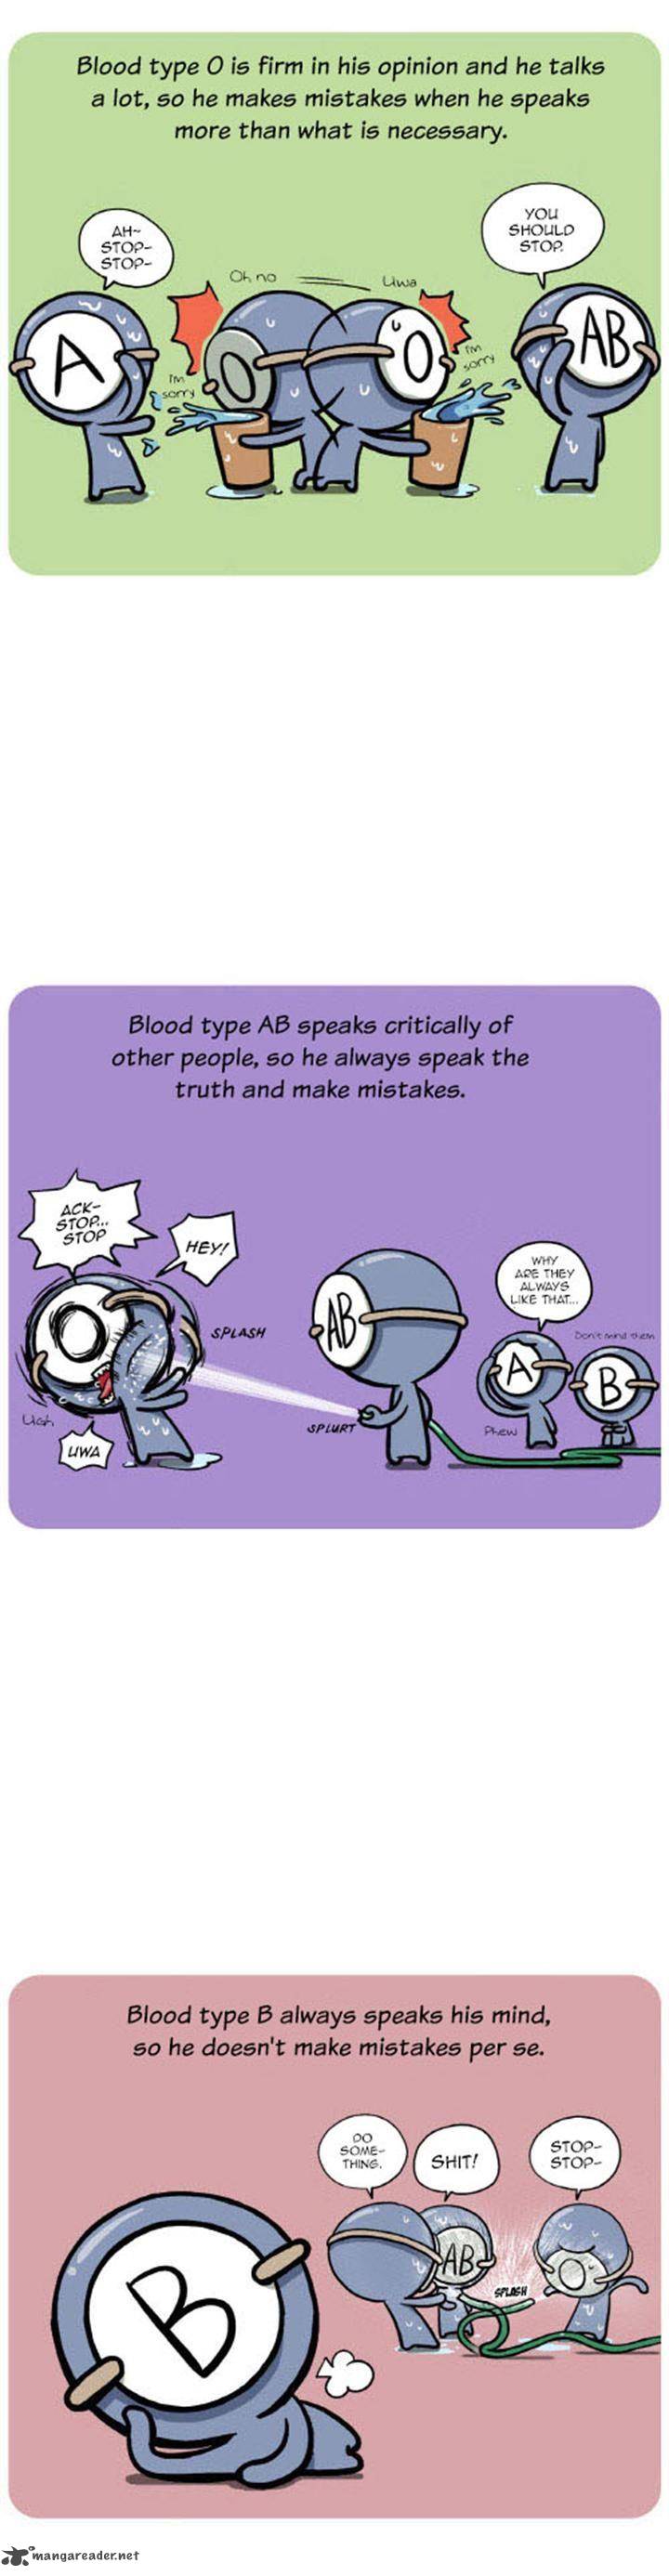 A Simple Thinking About Blood Types 13 6